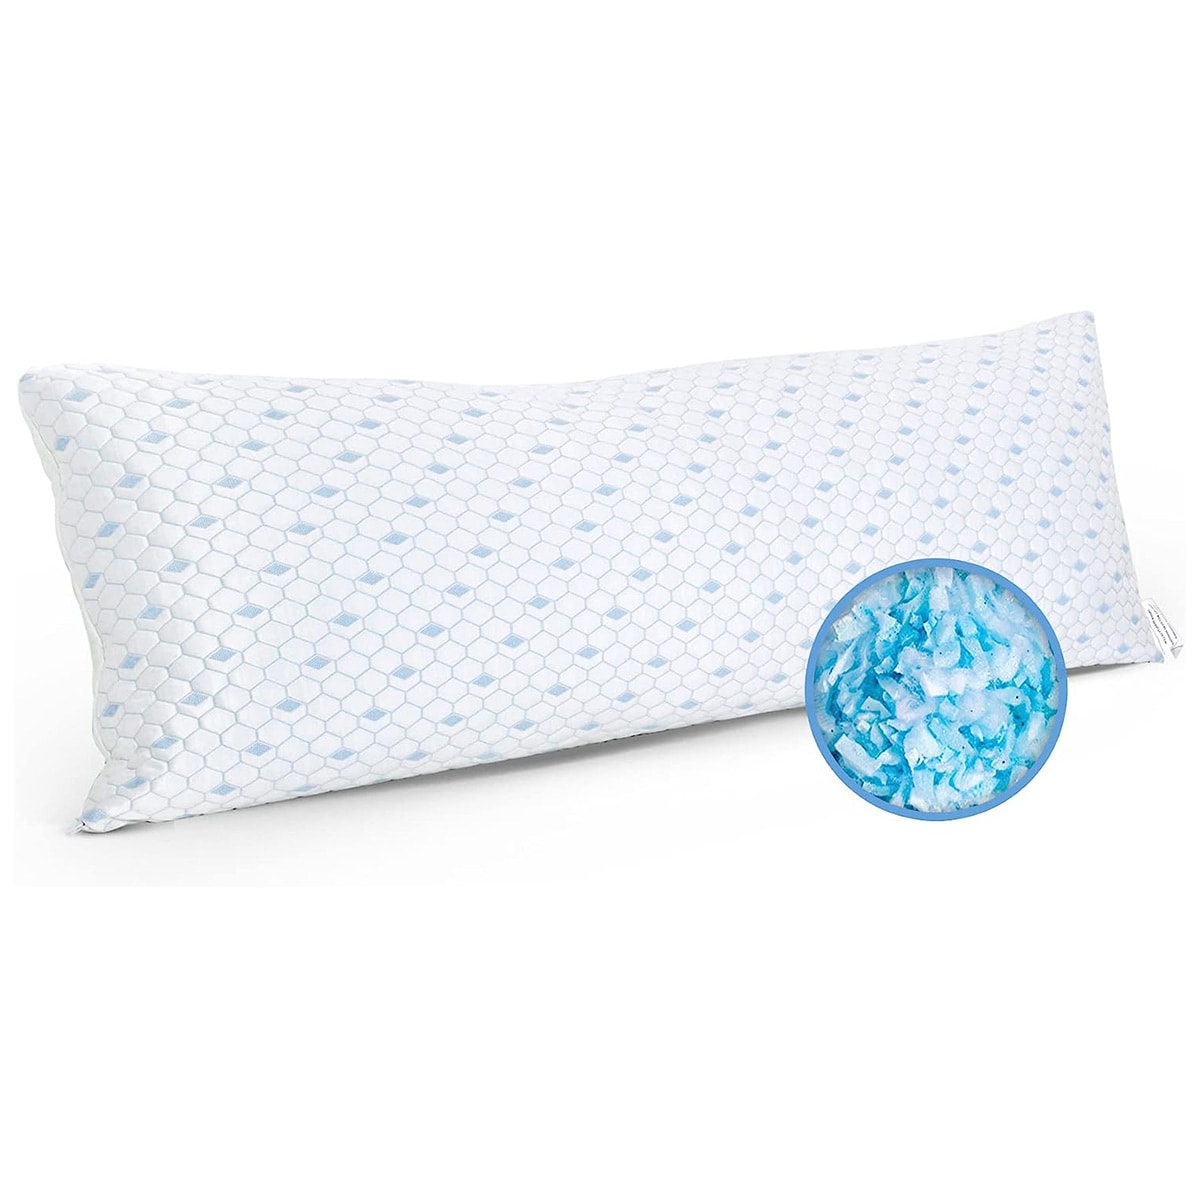 https://ak1.ostkcdn.com/images/products/is/images/direct/848db3beae2c428319d2dc6b823d8427c65c2a13/ESHINE-Full-Body-Pillows-for-Adults%2C20x54-Long-Pillows.jpg